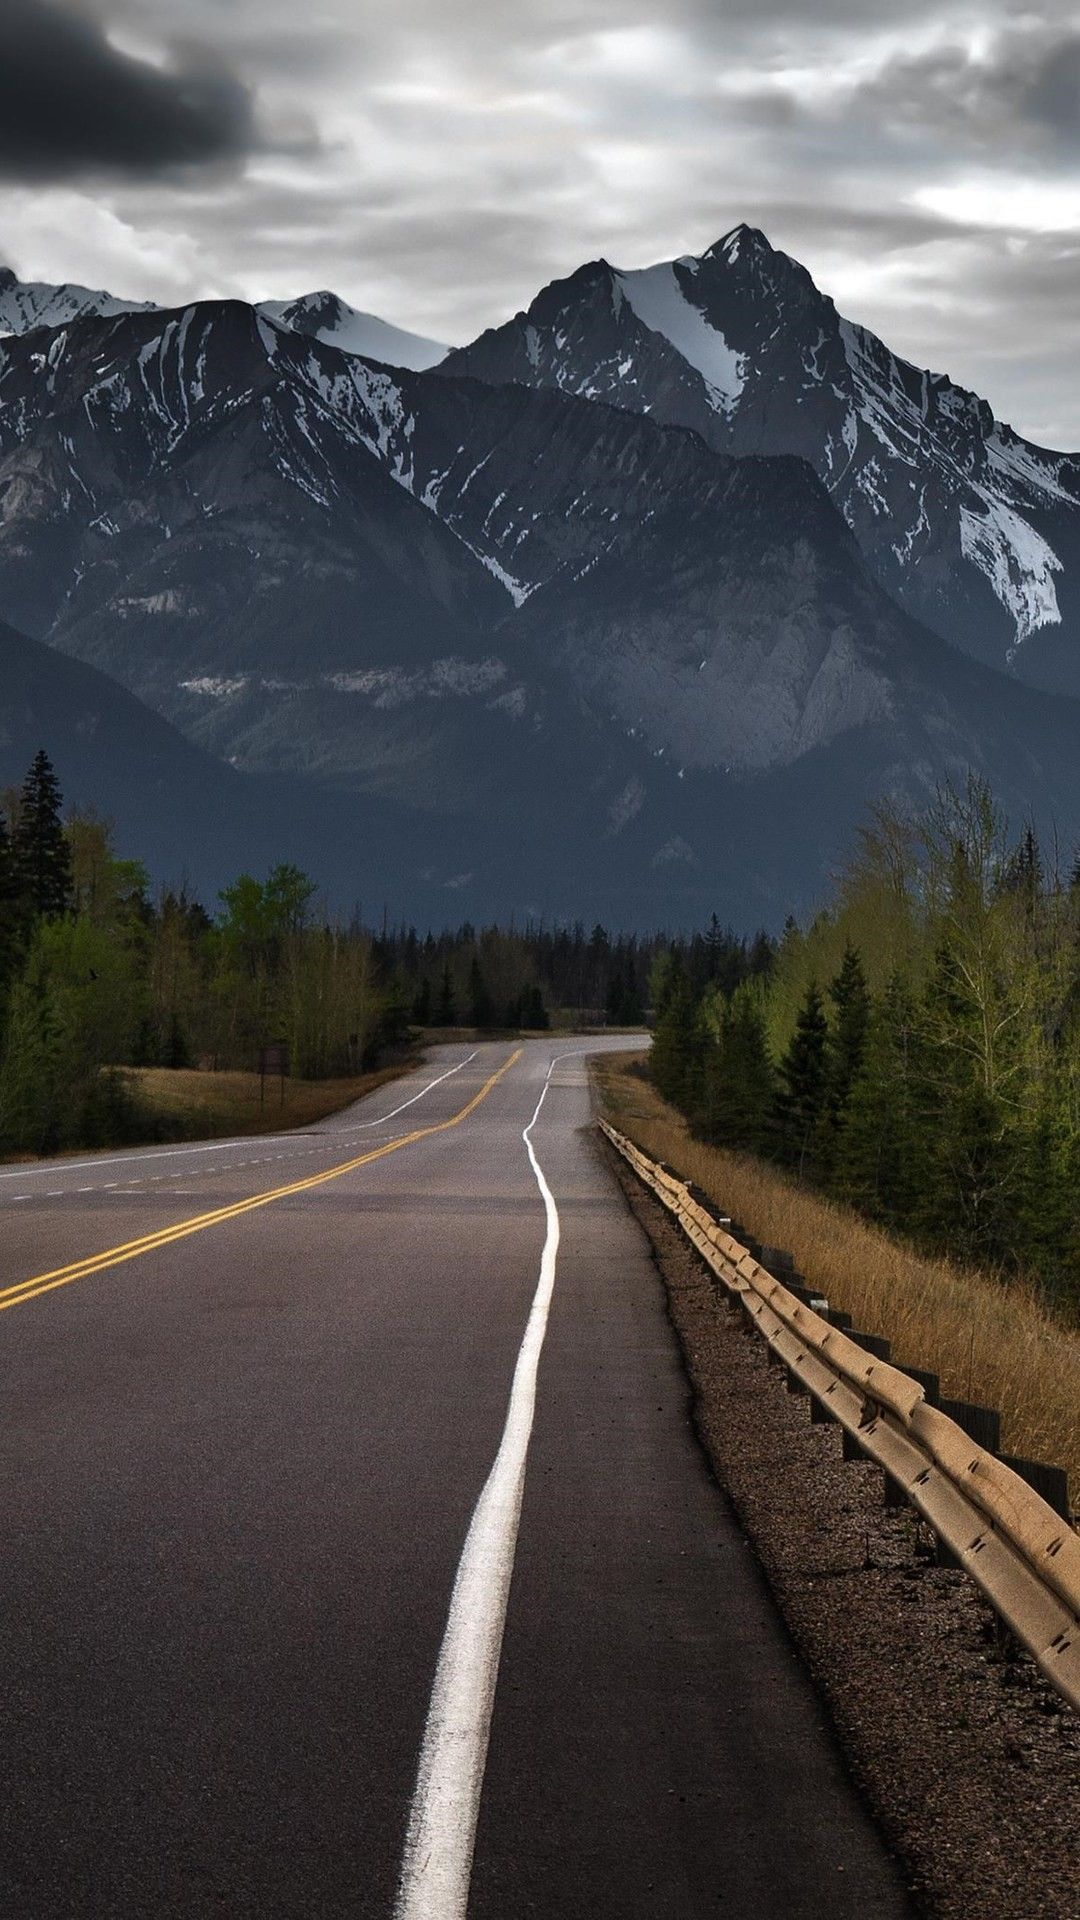 Road To Mountains HD Wallpaper - [1080x1920] download and share beautiful image in. Beautiful wallpaper hd, Best nature wallpaper, Beautiful nature wallpaper hd